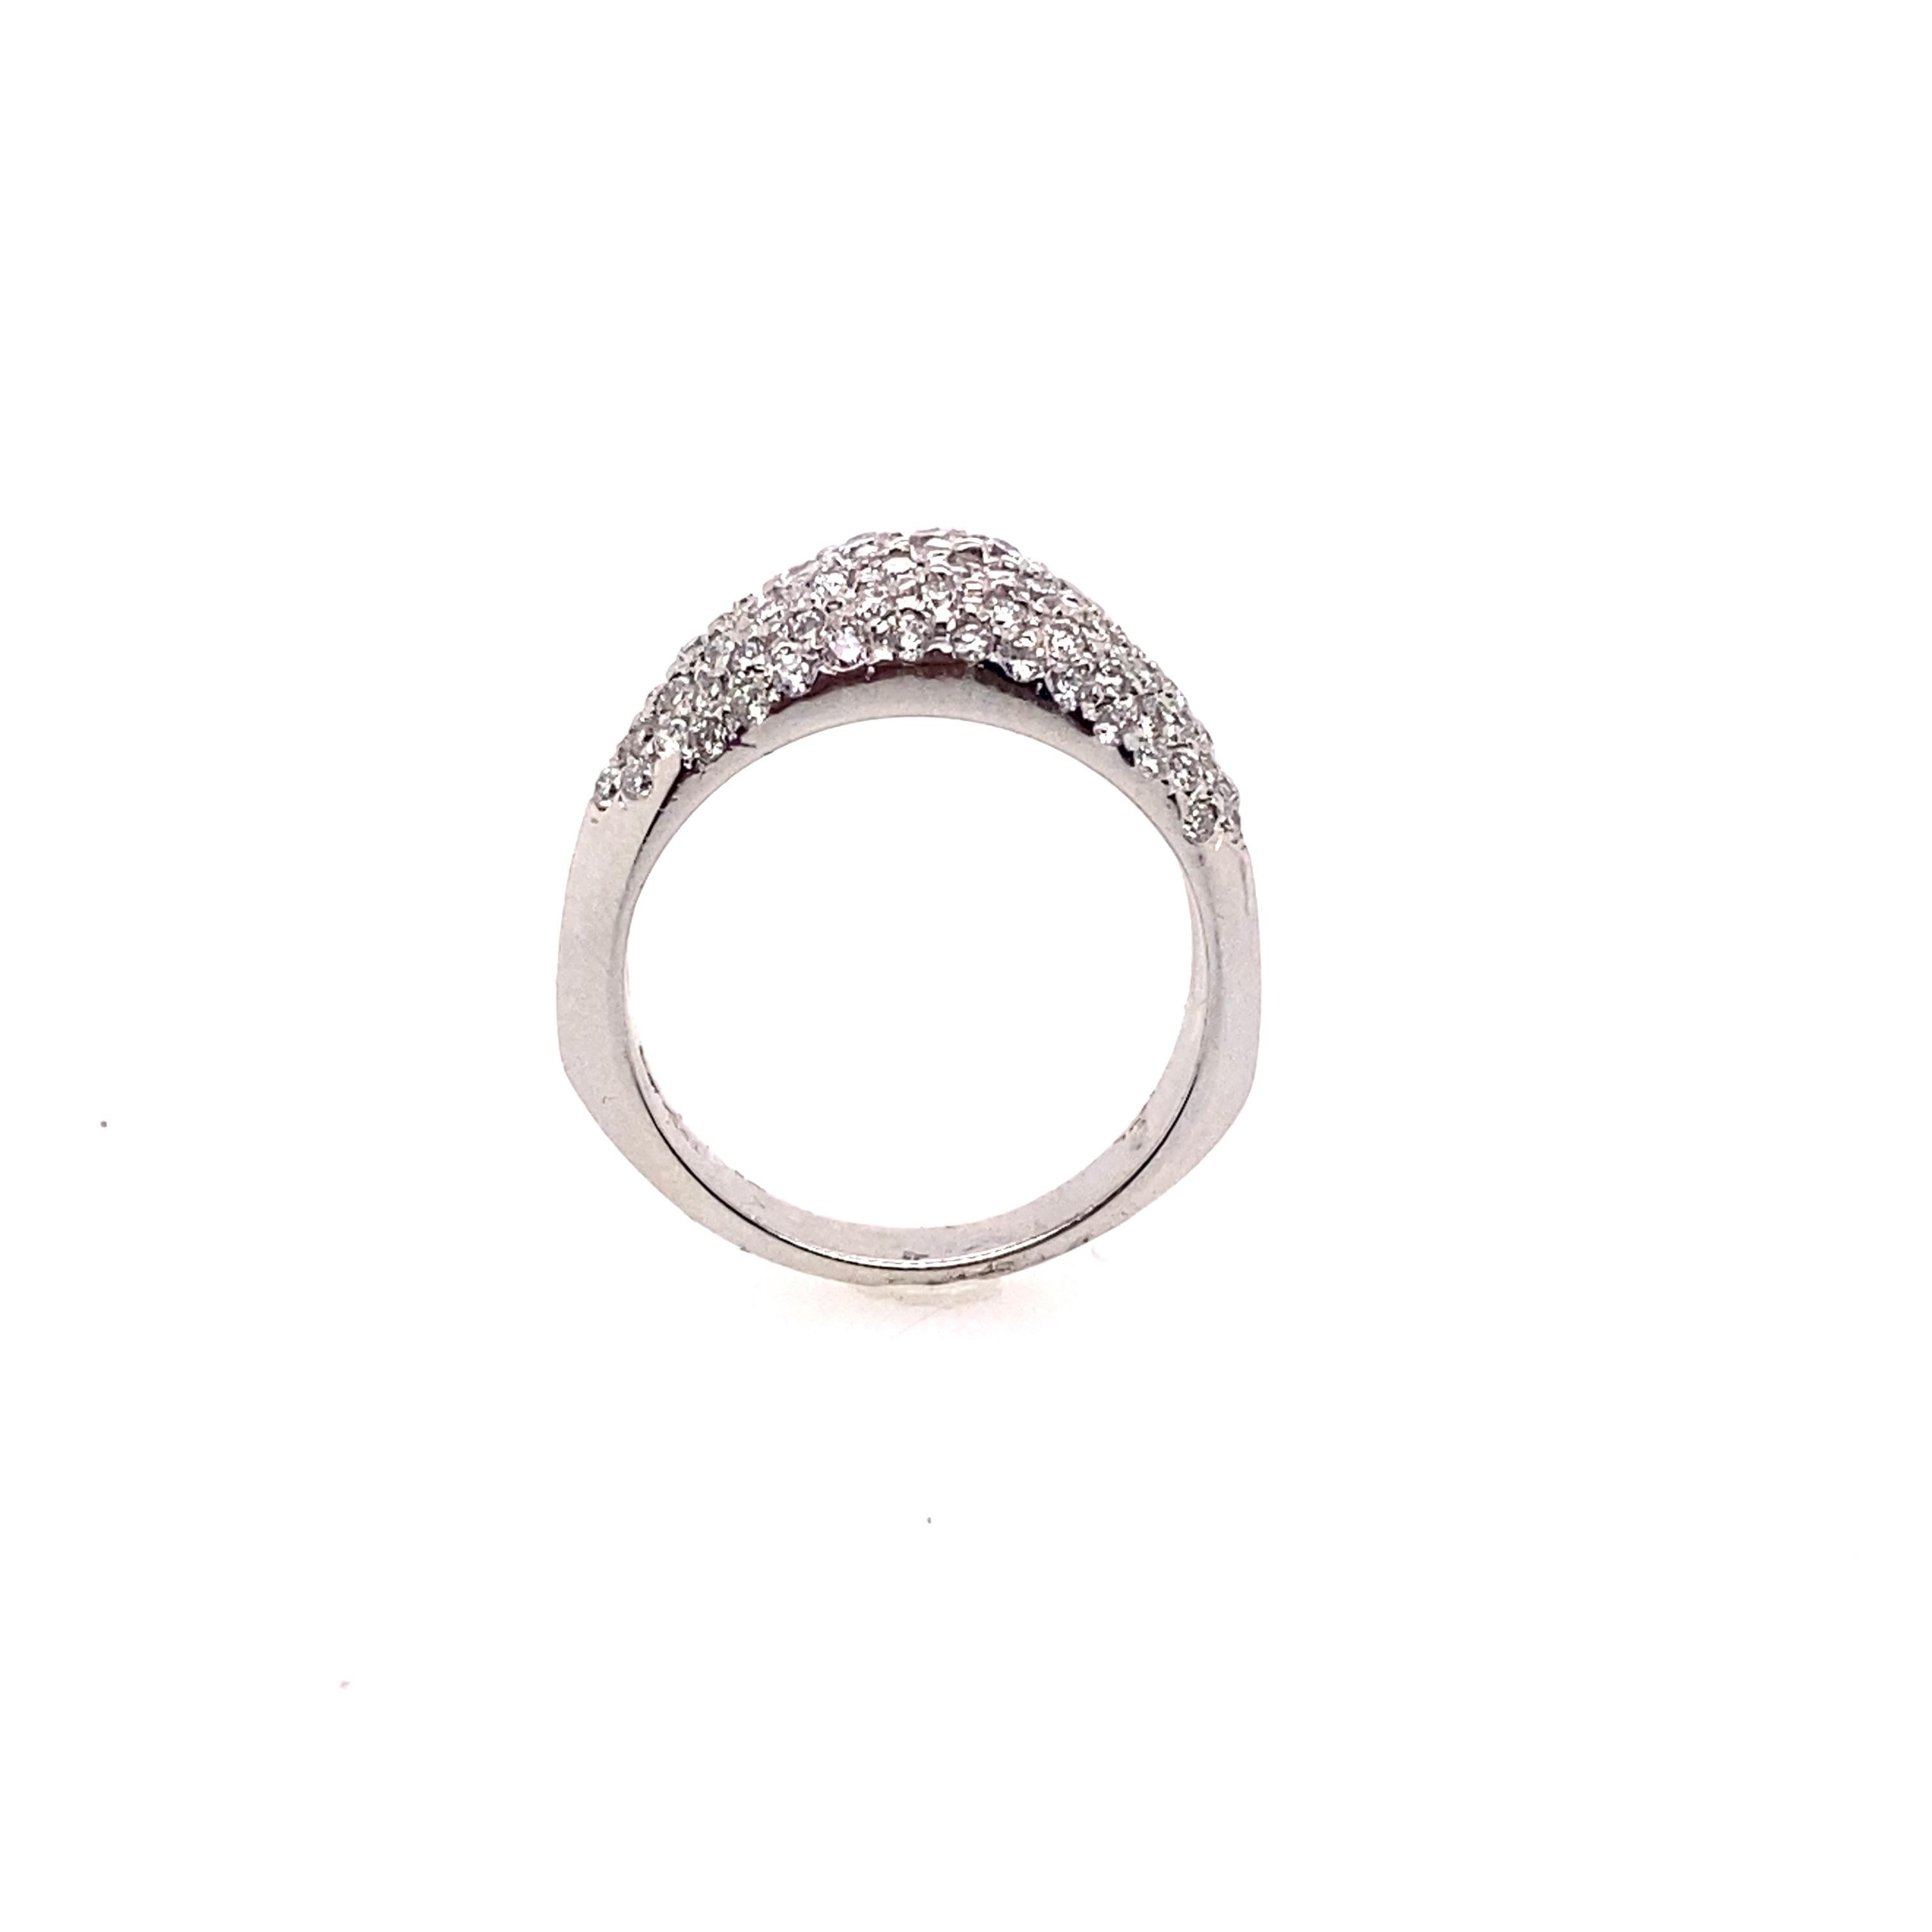 This beautiful dome shaped ring features Platinum base, with Micro-Pave style of hand set diamonds 1.00 carat of round diamonds. The perfect gift for any occasion.

Diamonds Weight: 1.00 carat
Diamonds Shape : Brilliant Round
Diamonds Color &